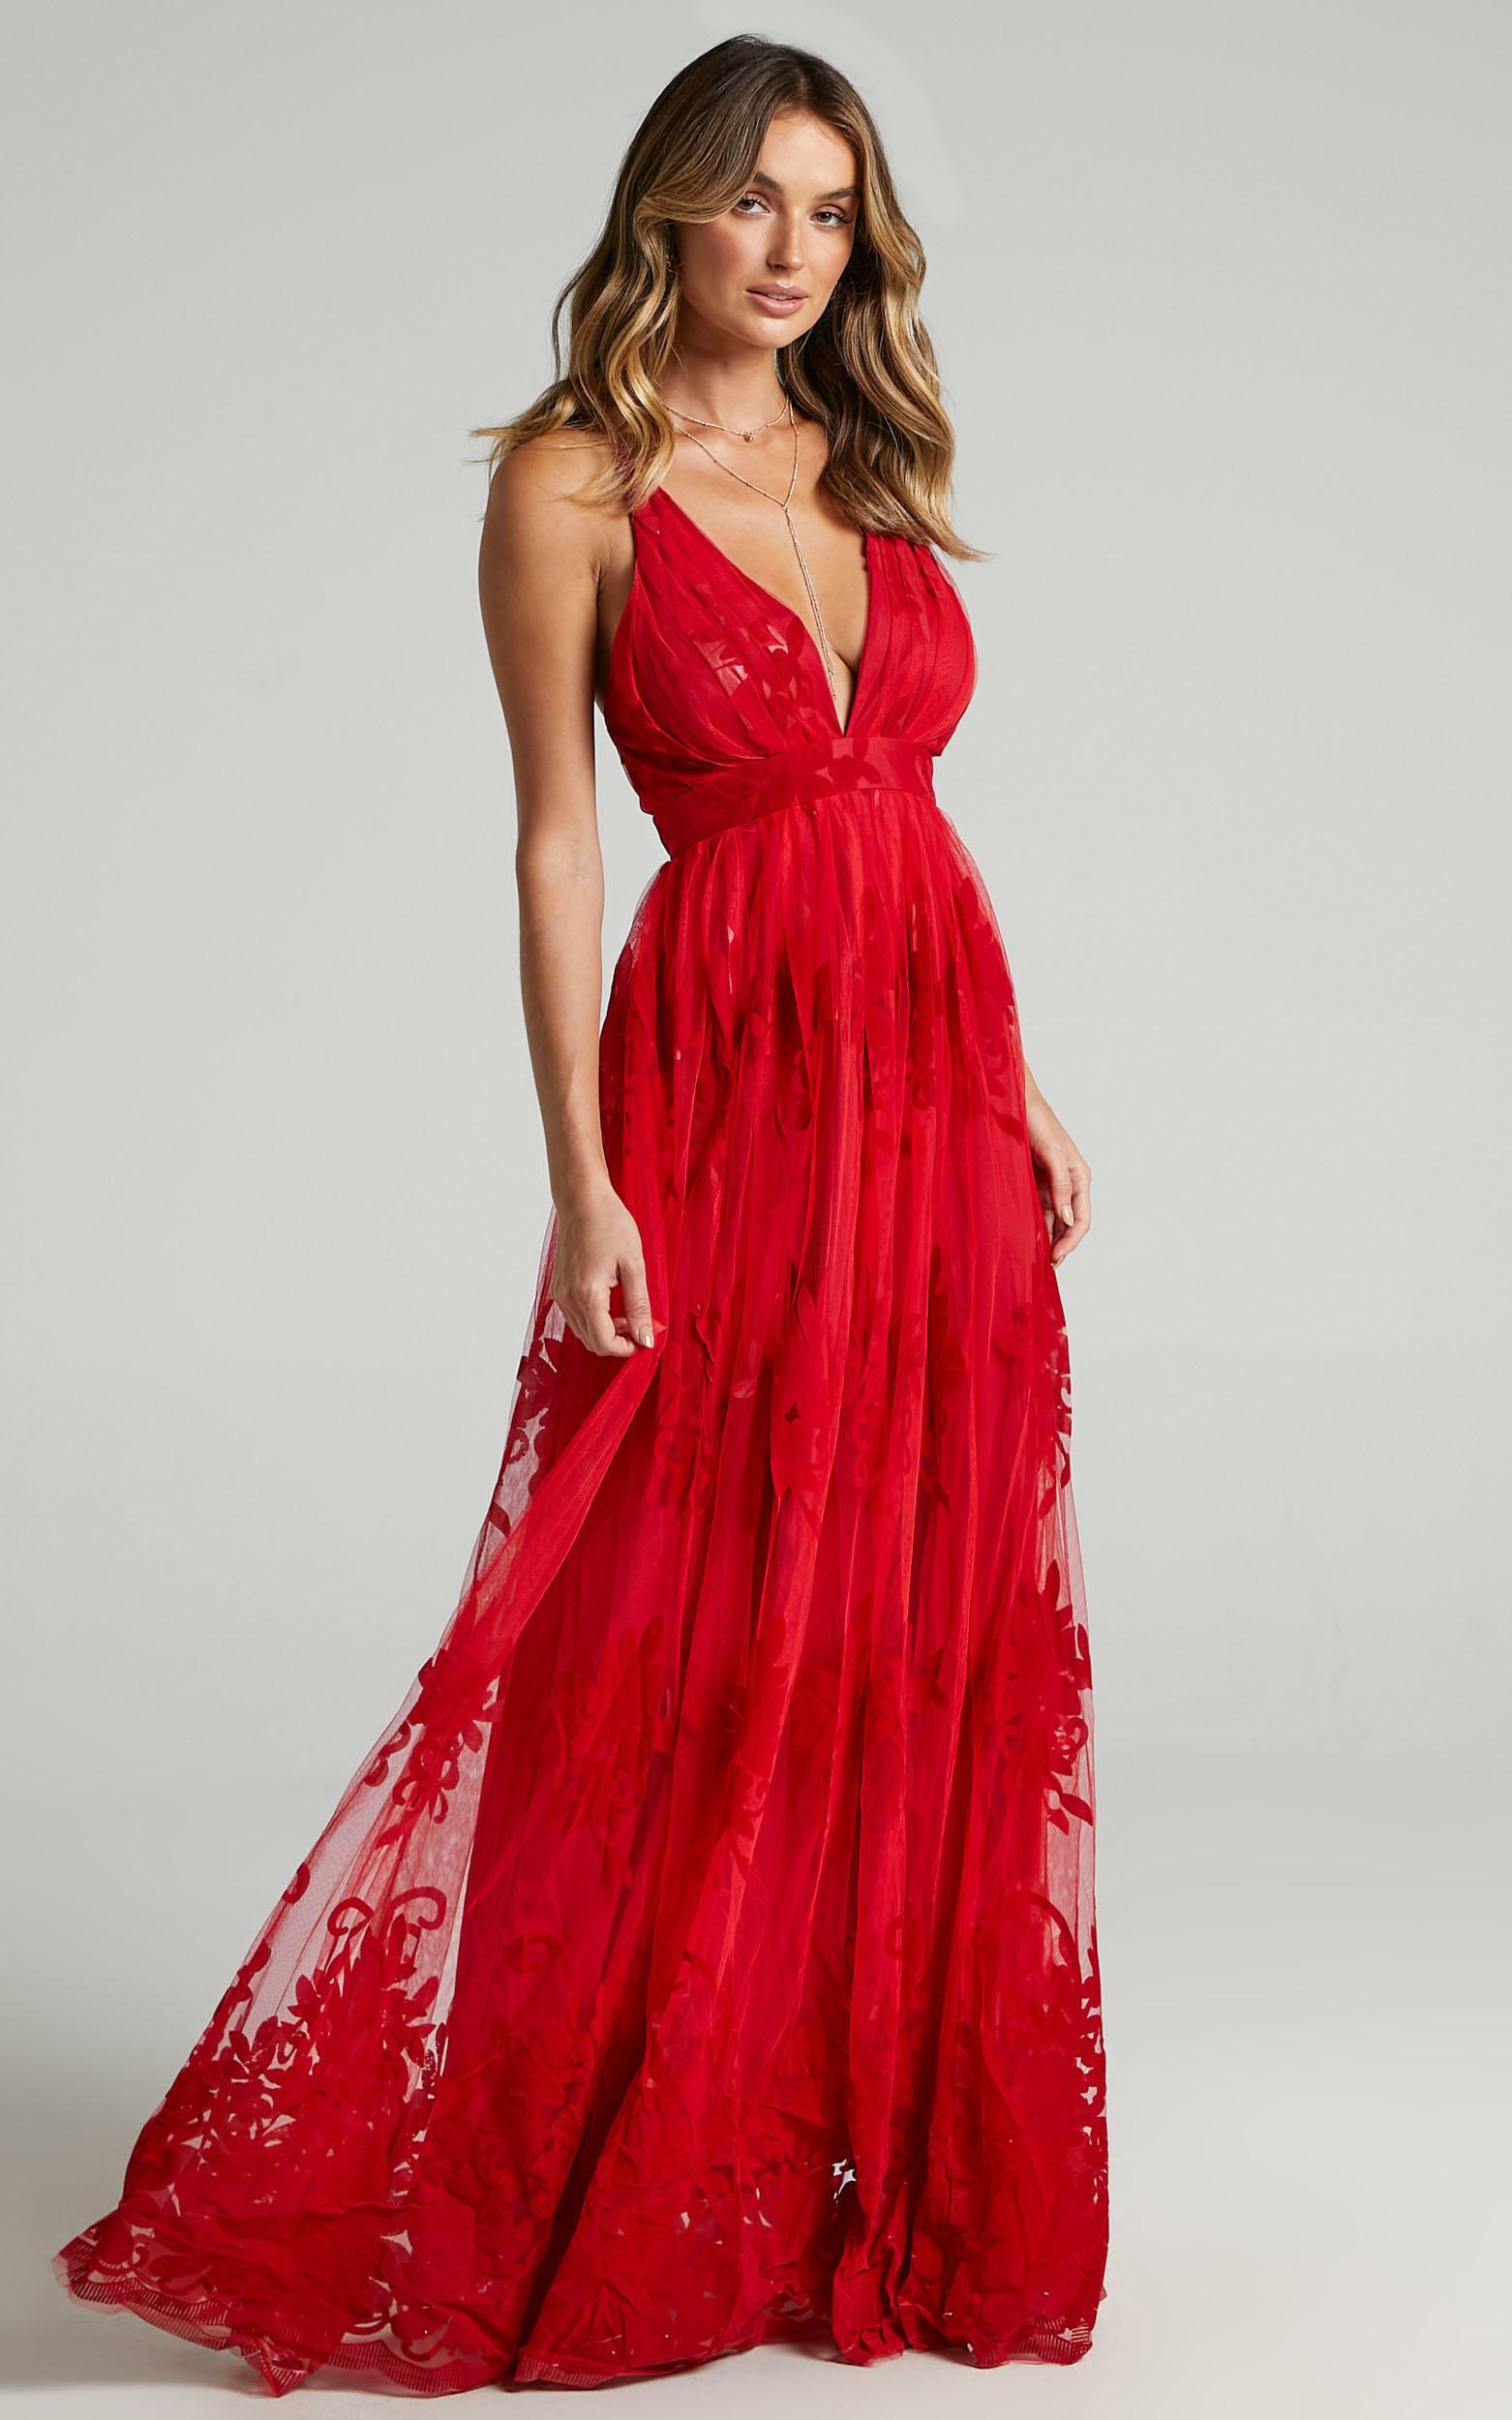 Promenade Maxi Dress in Red - 08, RED6, hi-res image number null